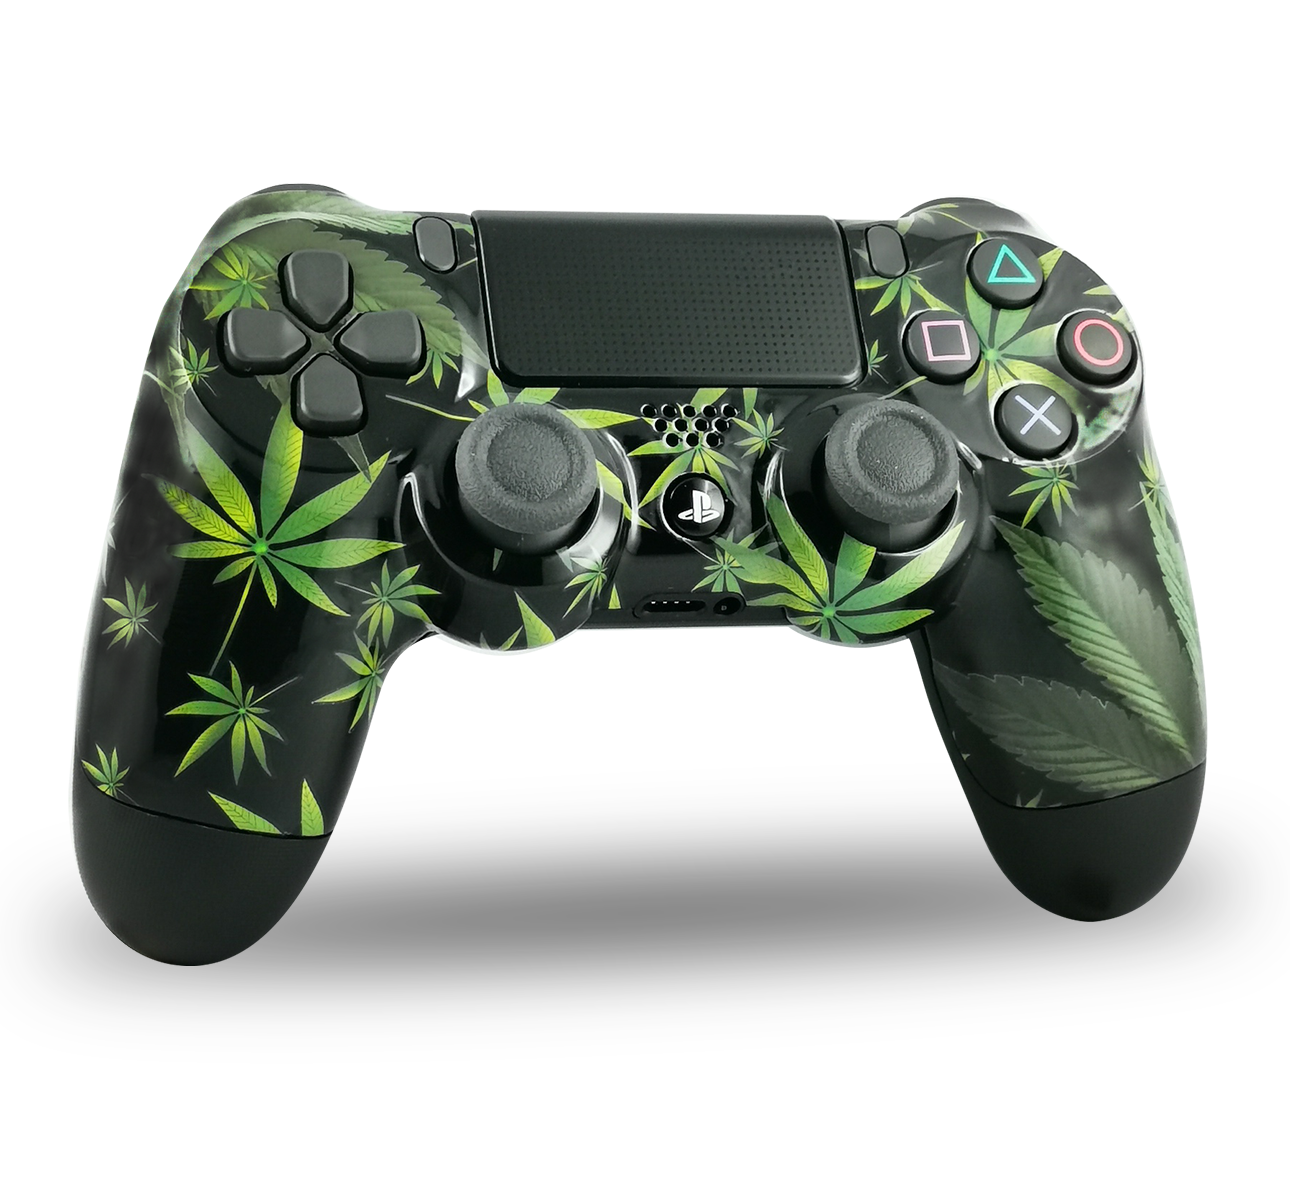 manette-PS4-custom-playstation-4-sony-personnalisee-drawmypad-kanadian-leaves-canabis